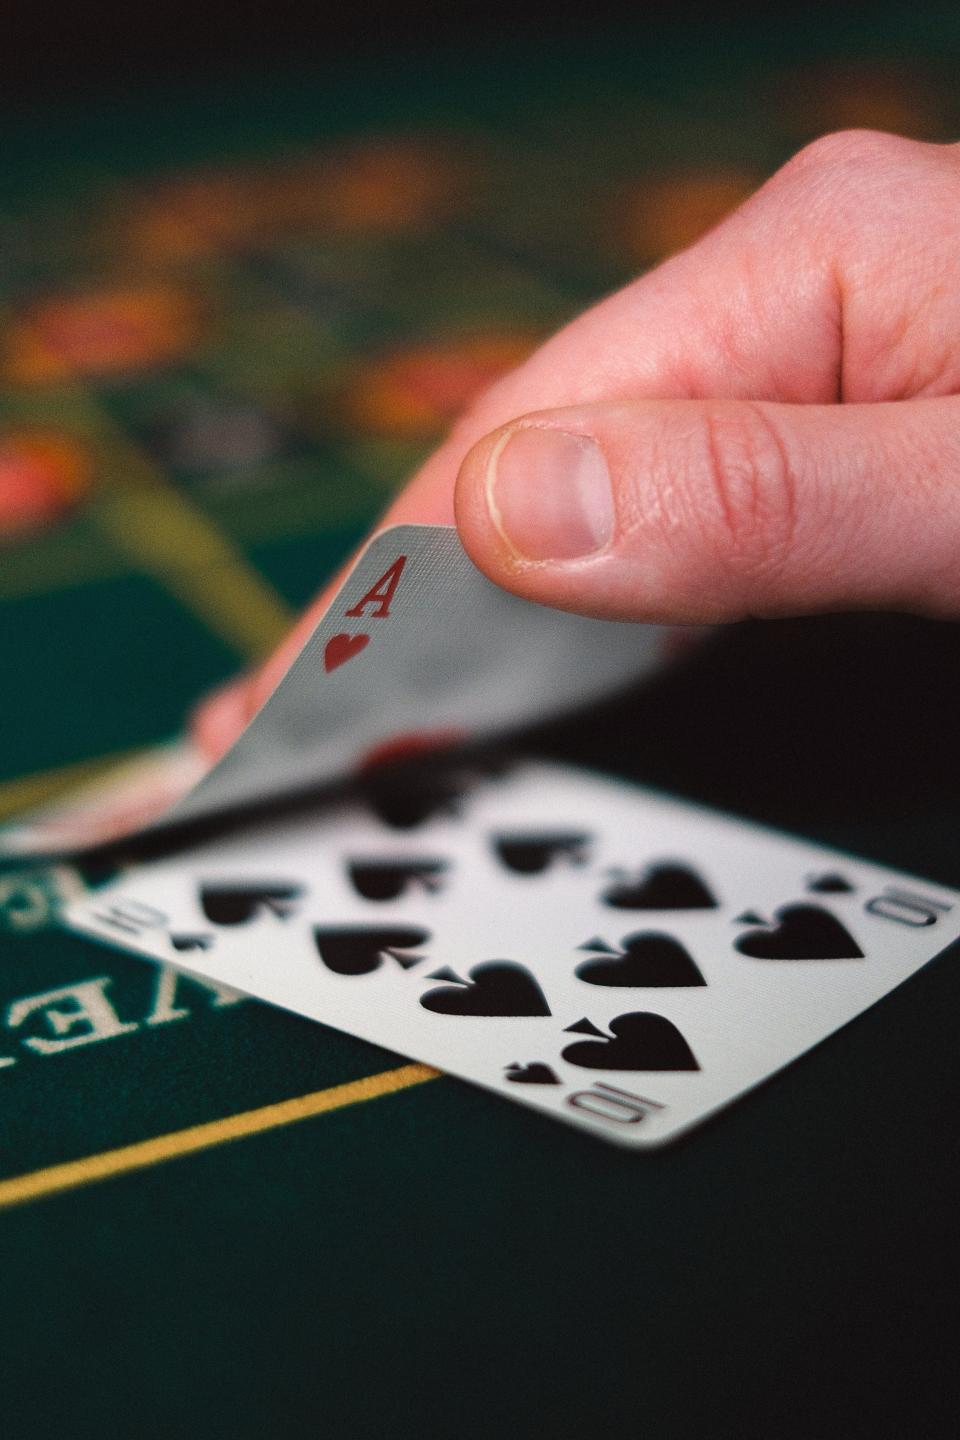 File photo of a blackjack hand. Blackjack is the most widely played casino banking game in the world.